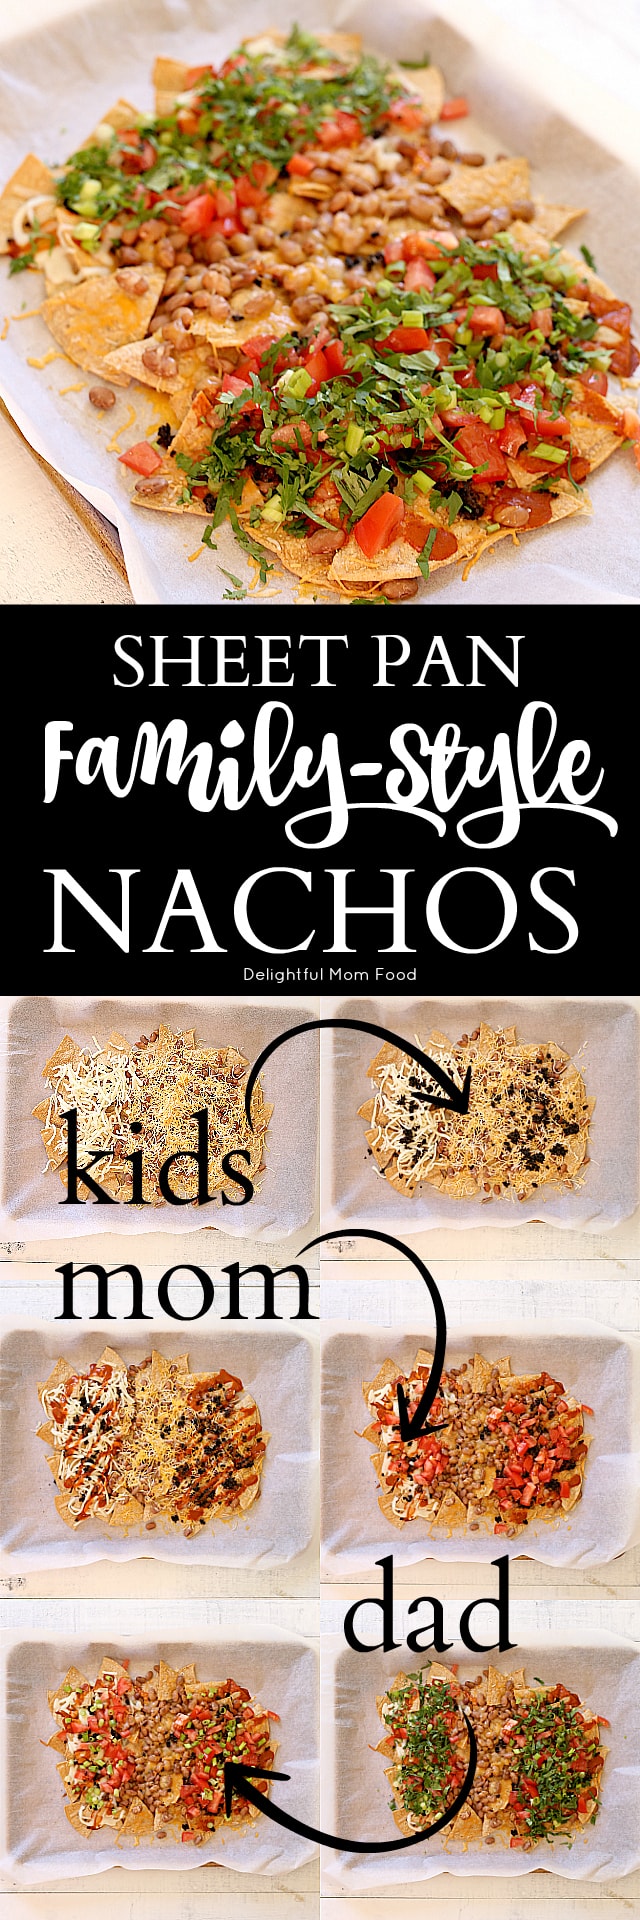 Simple nachos recipe custom created for each member of the family and baked to perfection on a sheet pan! Forget about the kids not wanting veggies on top and the husband wants his enchilada sauce and you want extra cheese. Now you can cater to all members of the family in one of the easiest sheet pan dinner recipes!